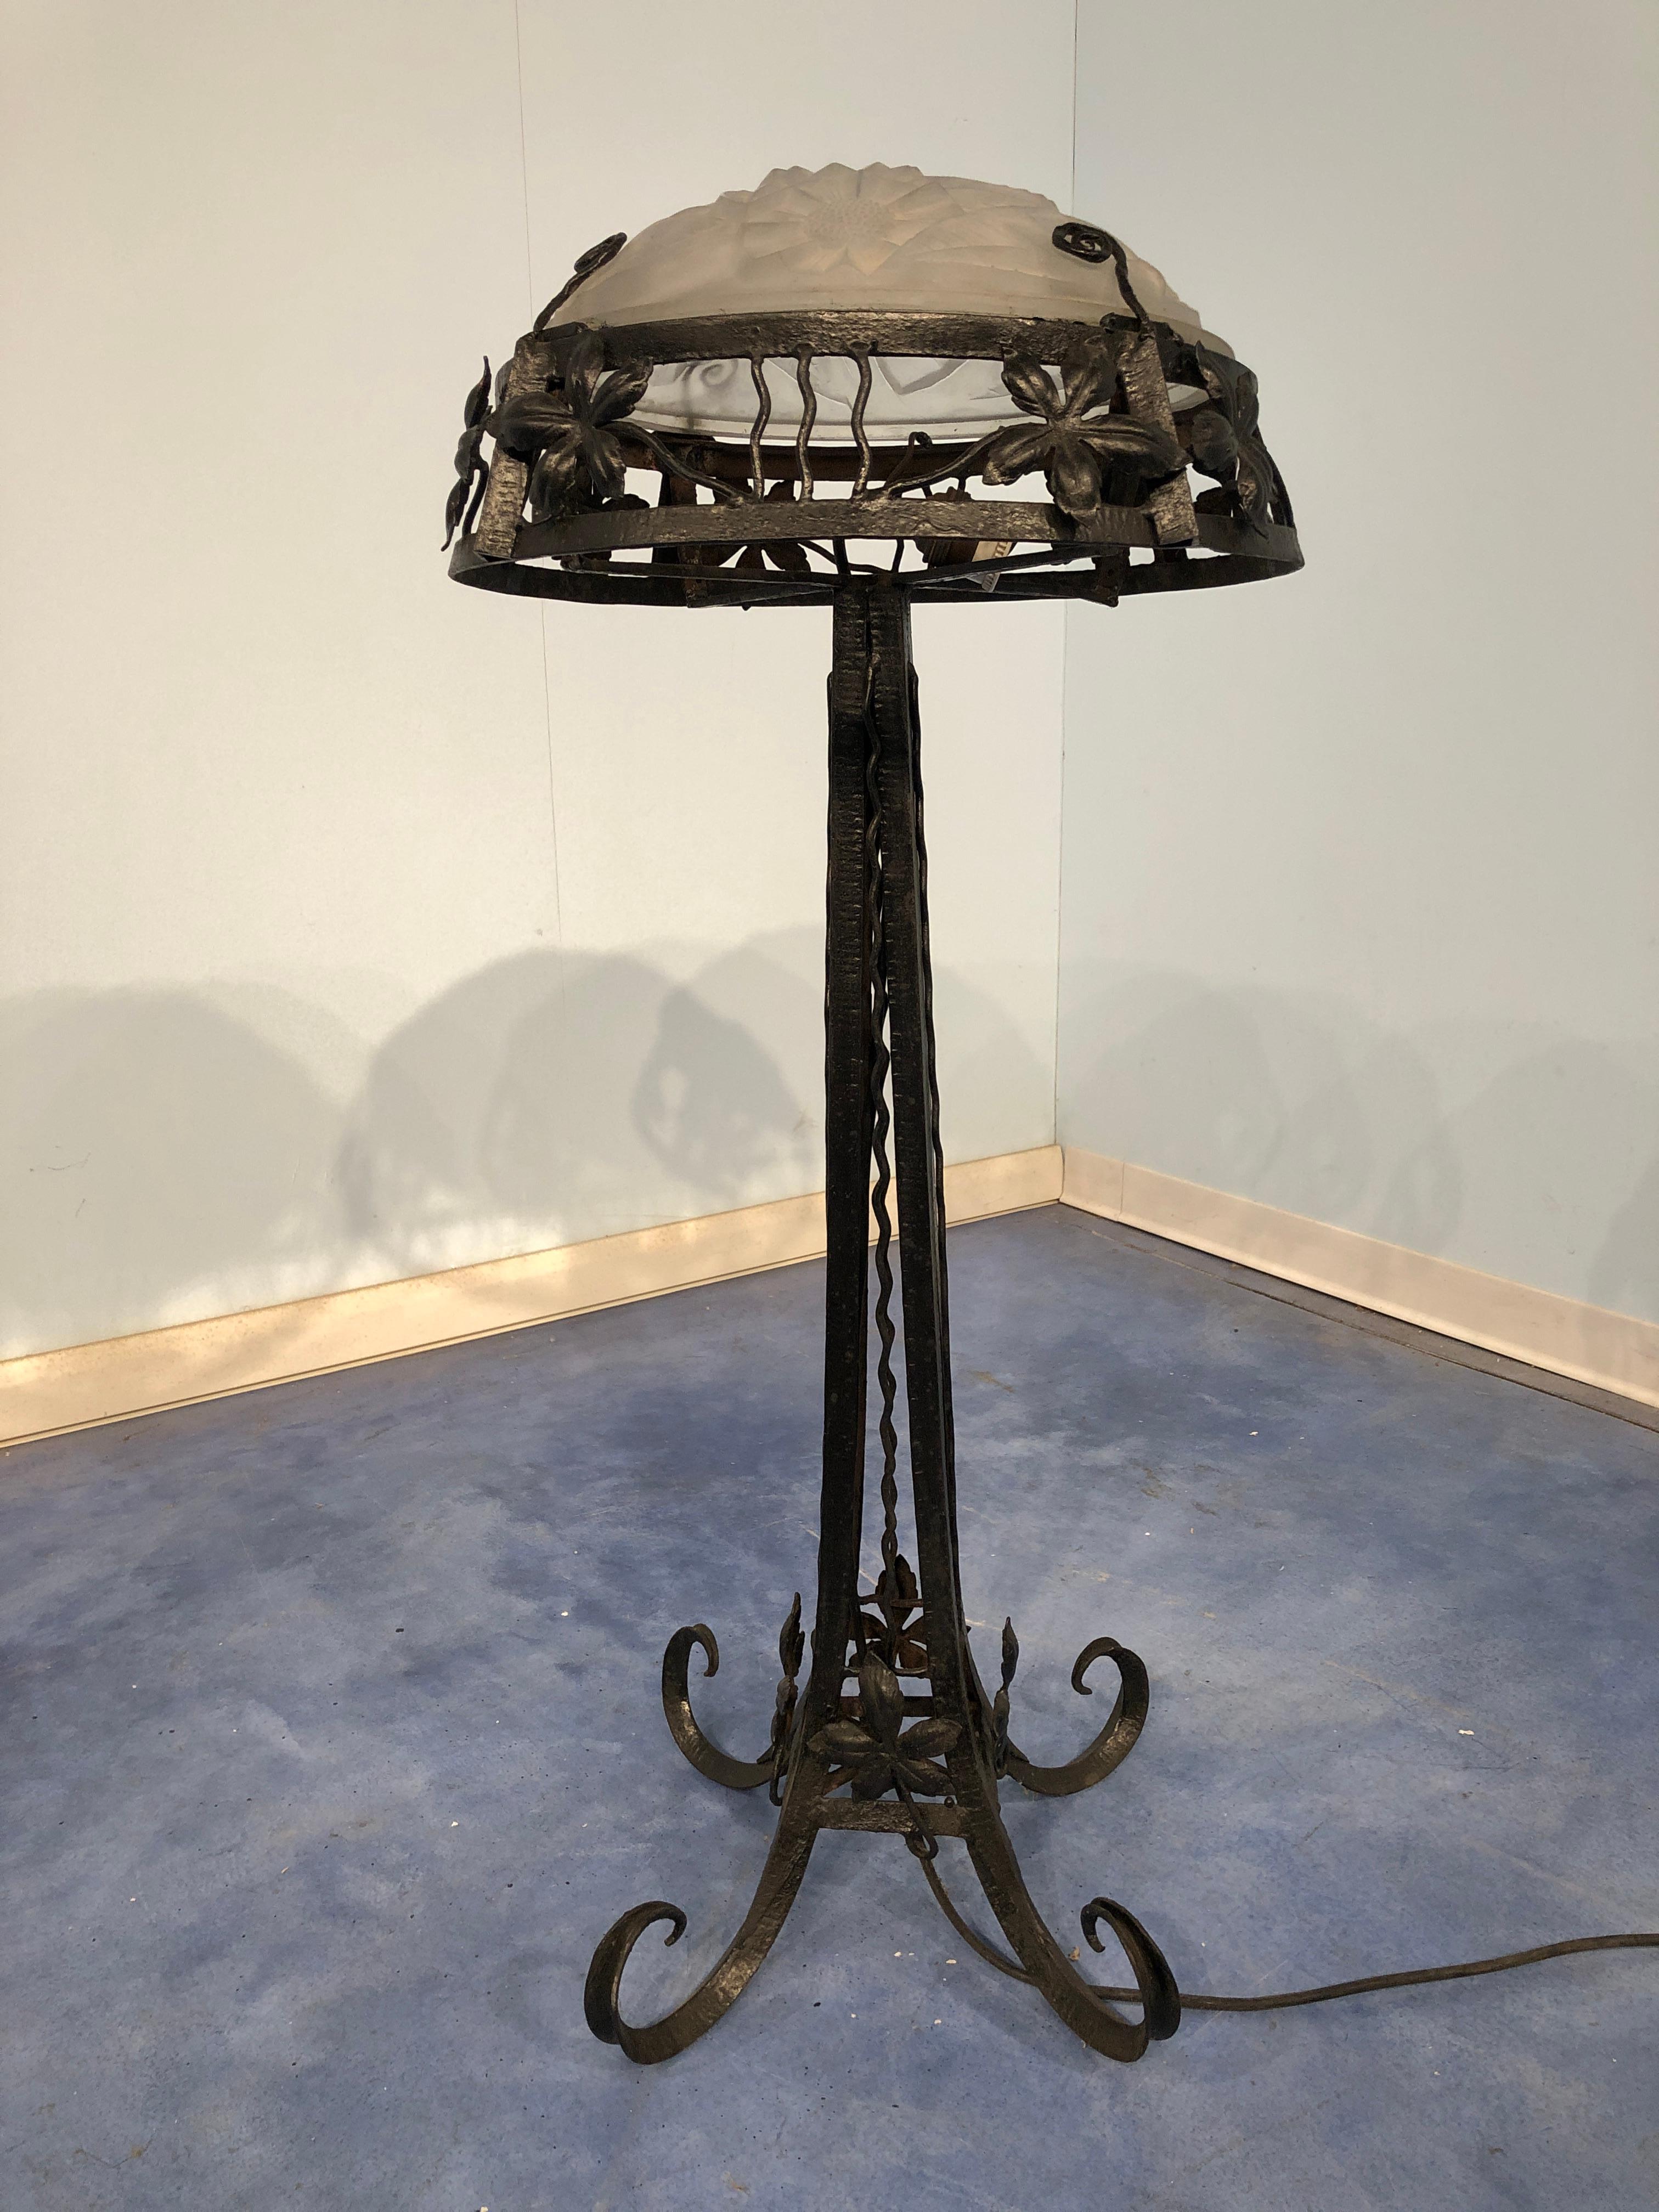 Beautiful French art deco lamp in thick molded glass shade with an atypical pattern and superb wrought iron base.
Signed by Degué (David Guéron), 1930.